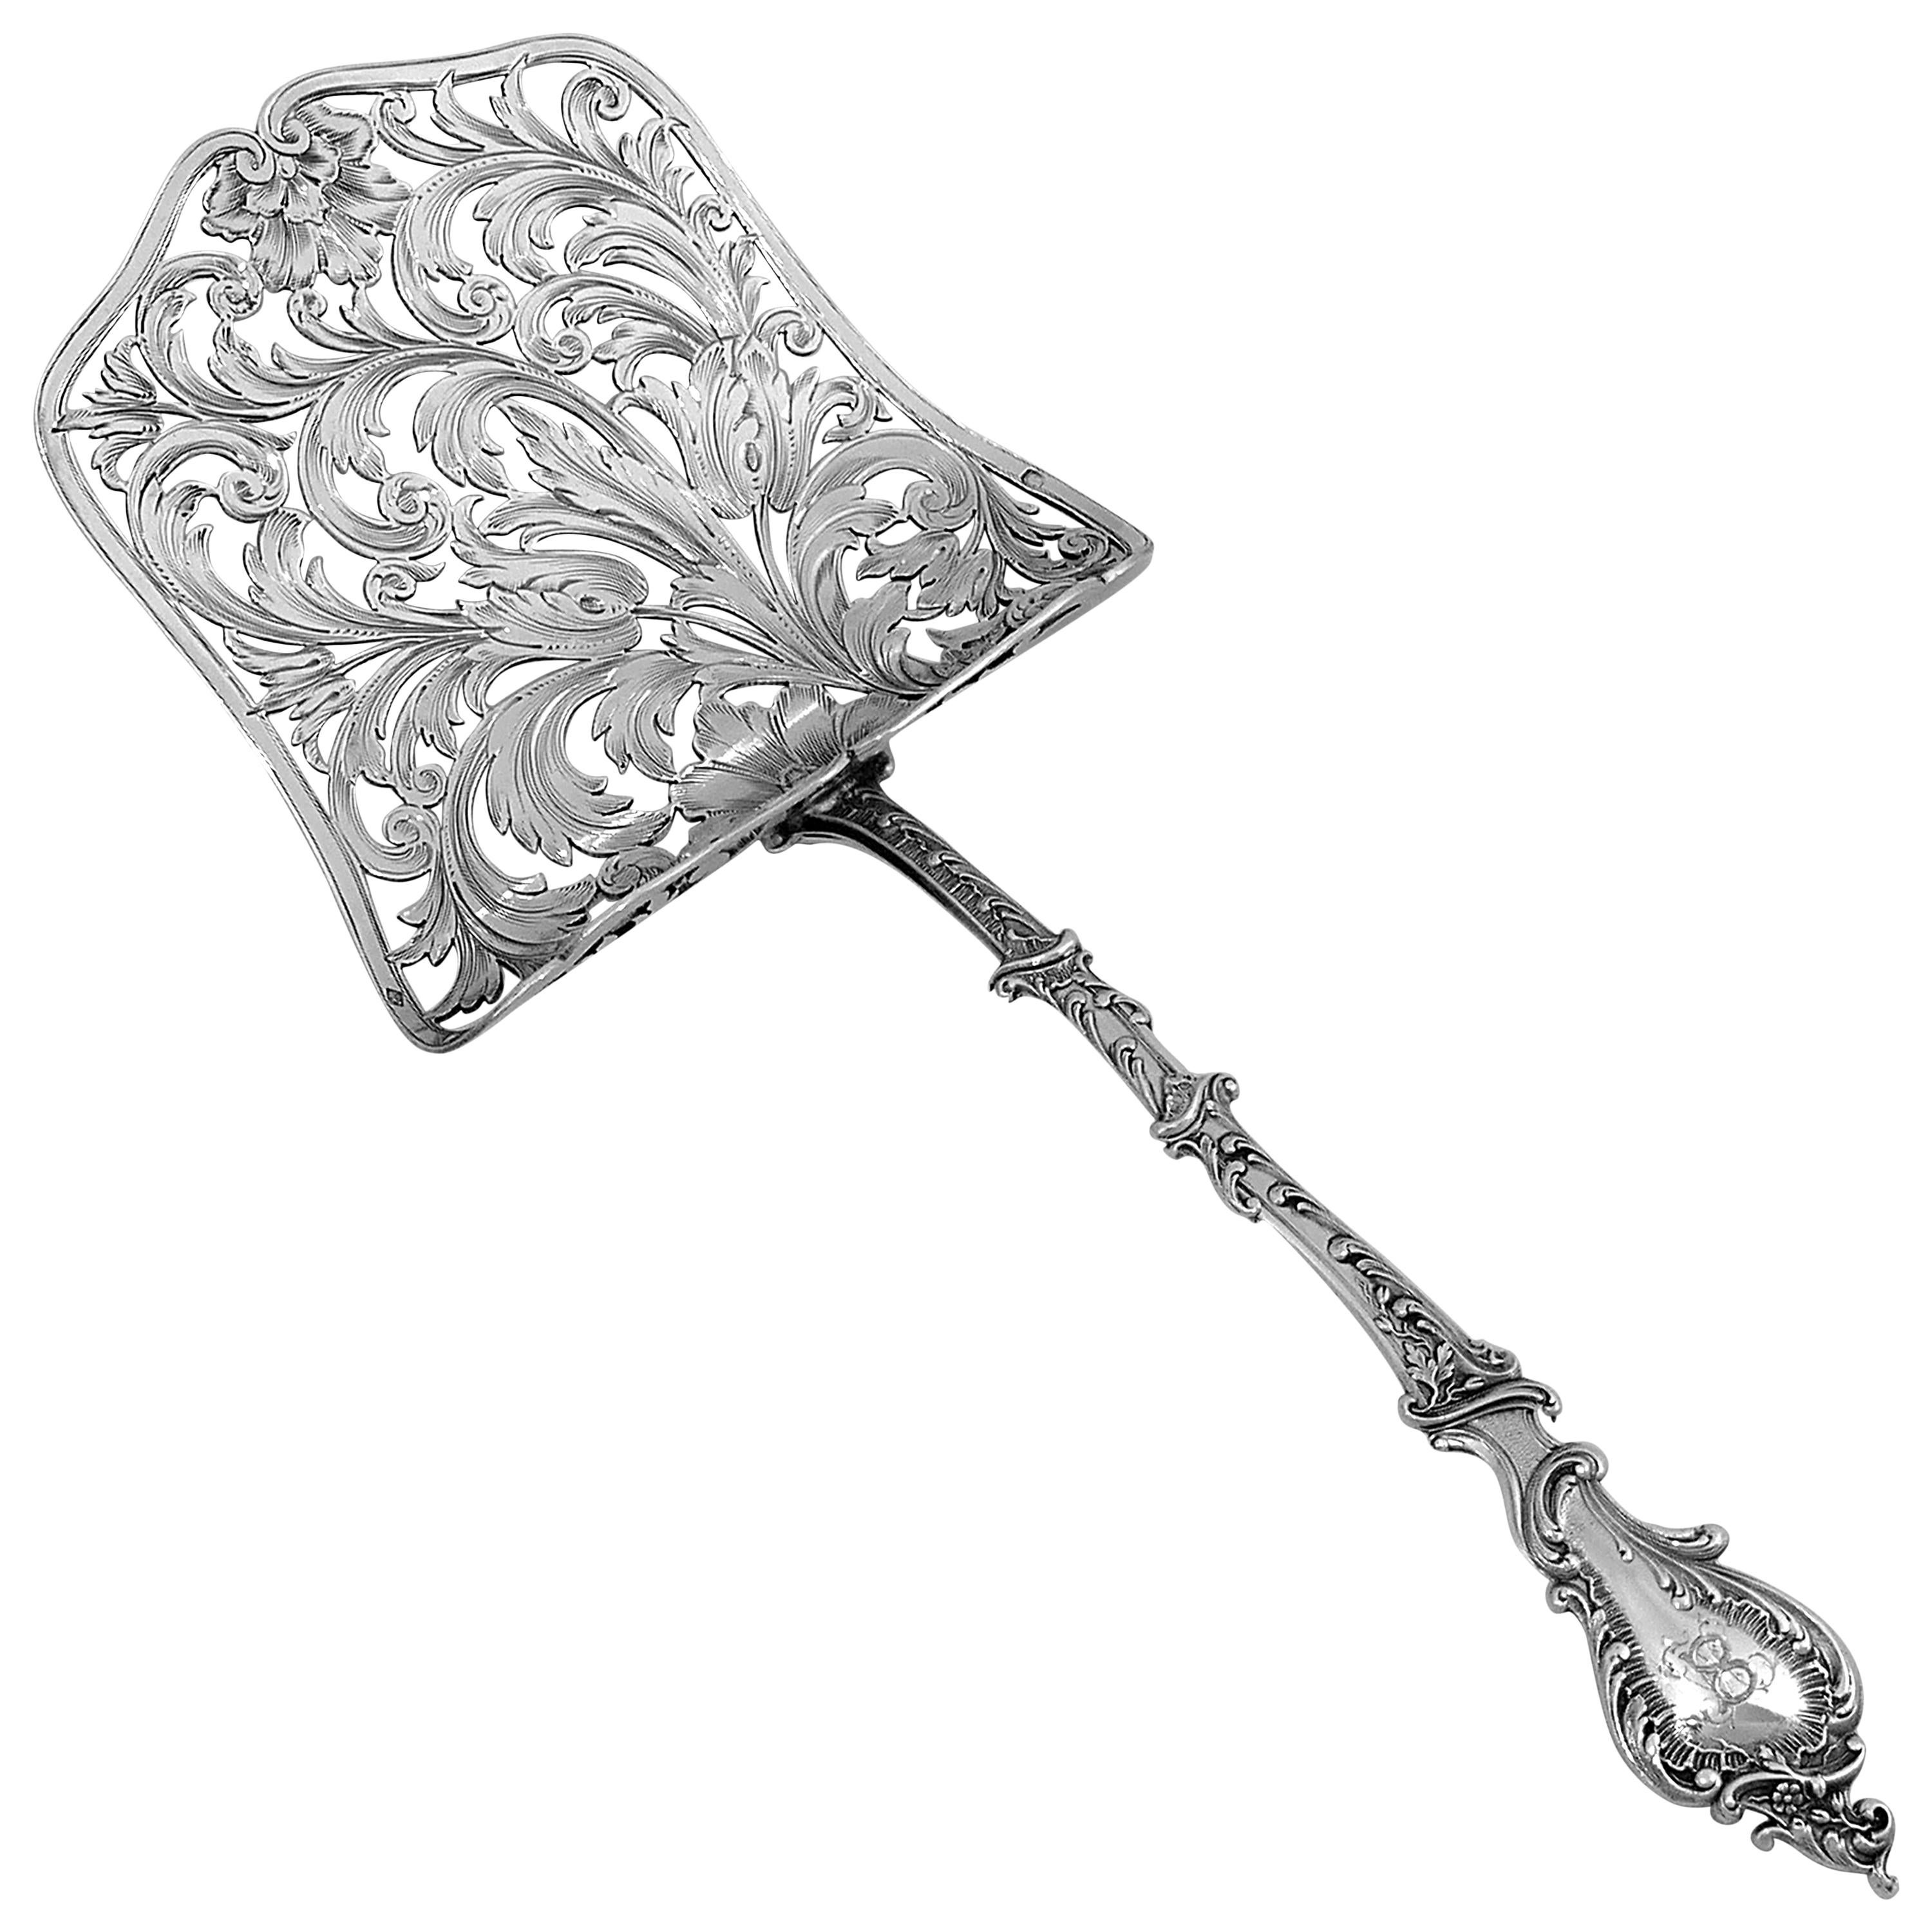 Soufflot French All Sterling Silver Asparagus Pastry Server For Sale